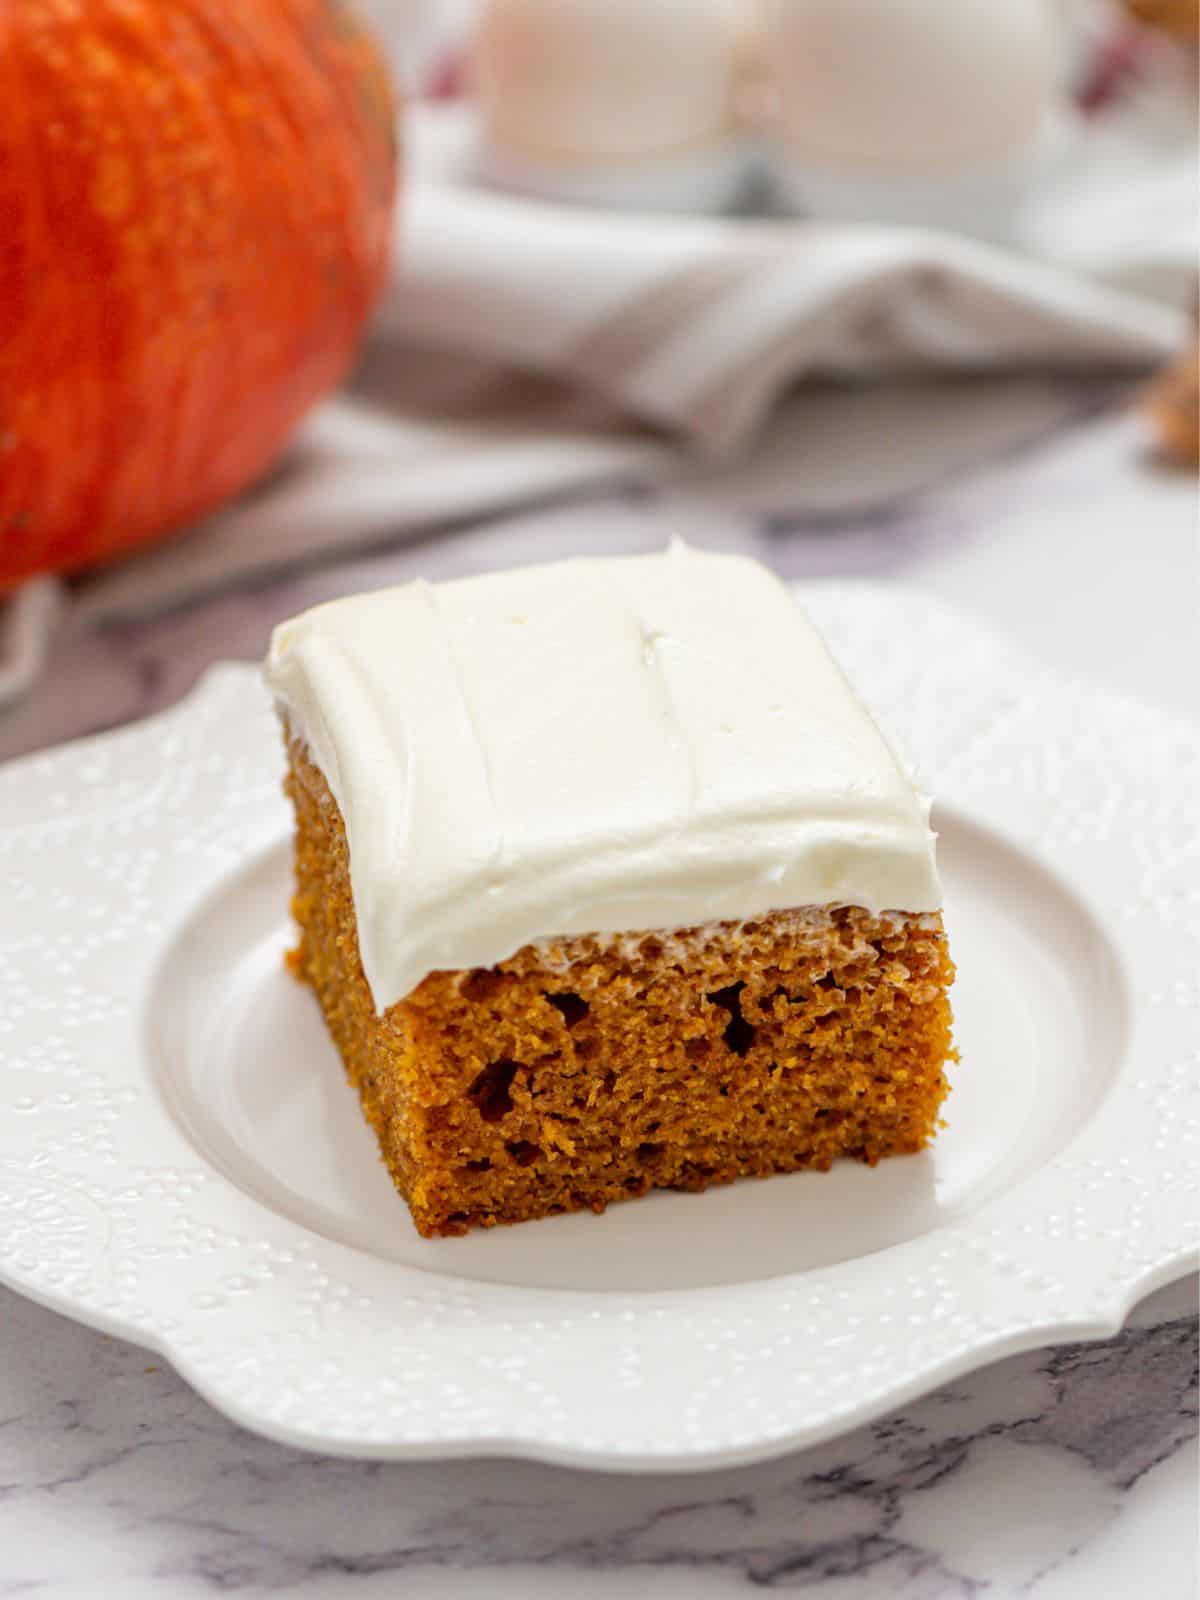 Slice of pumpkin cake with cream cheese frosting on white plate.